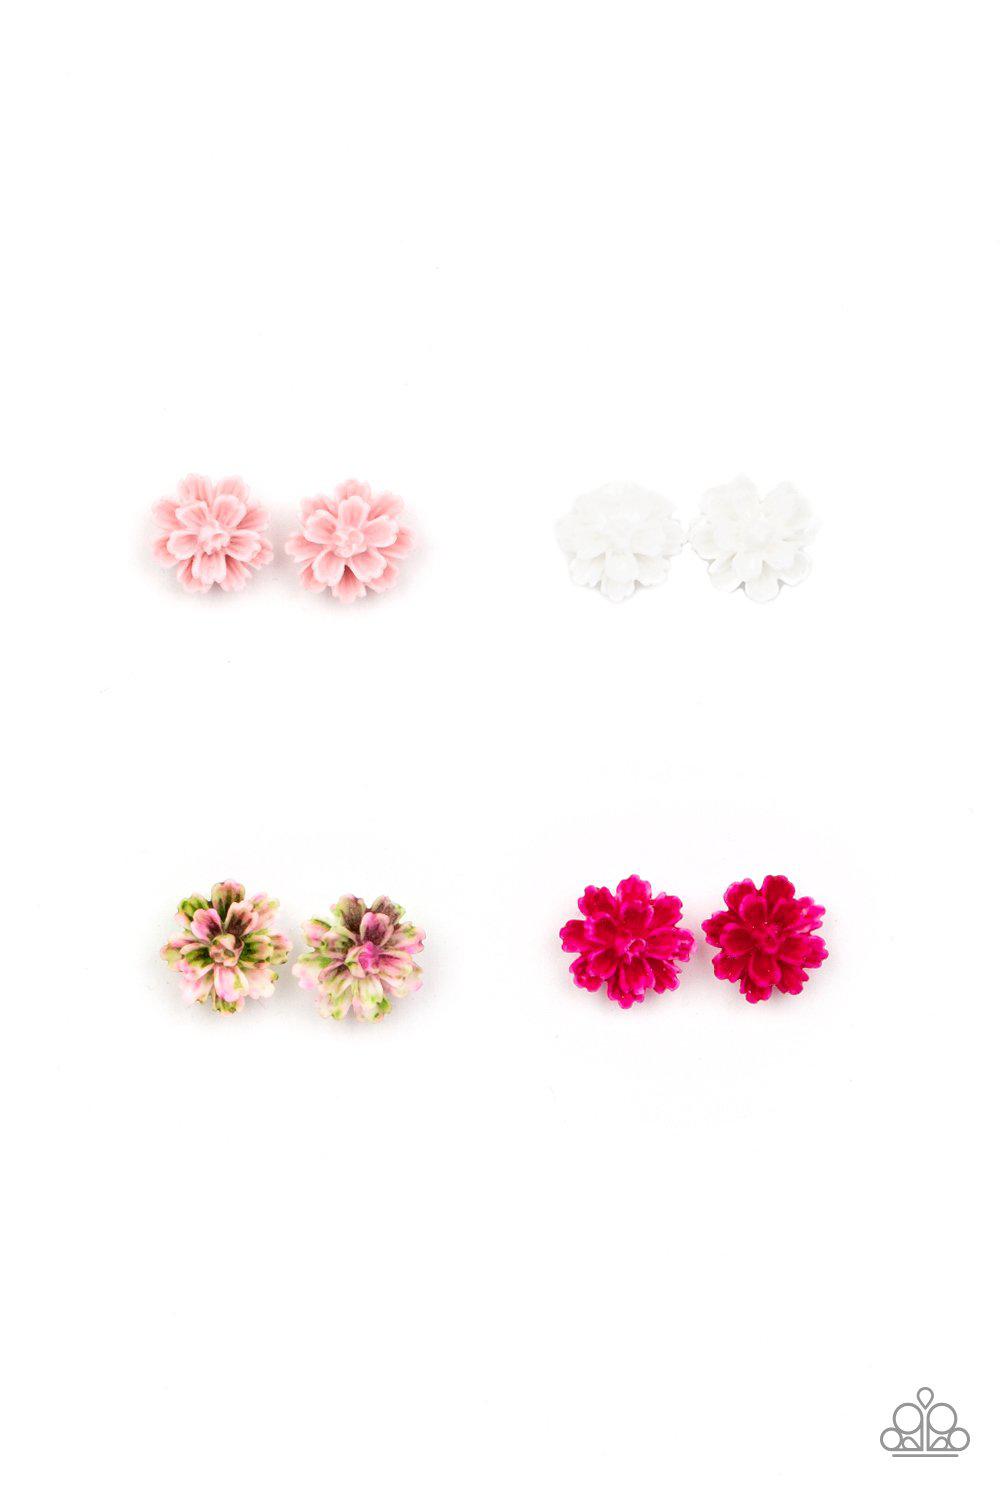 Starlet Shimmer Children&#39;s Pink and White Flower Post Earrings - Paparazzi Accessories (set of 5 pairs) - Full set -CarasShop.com - $5 Jewelry by Cara Jewels